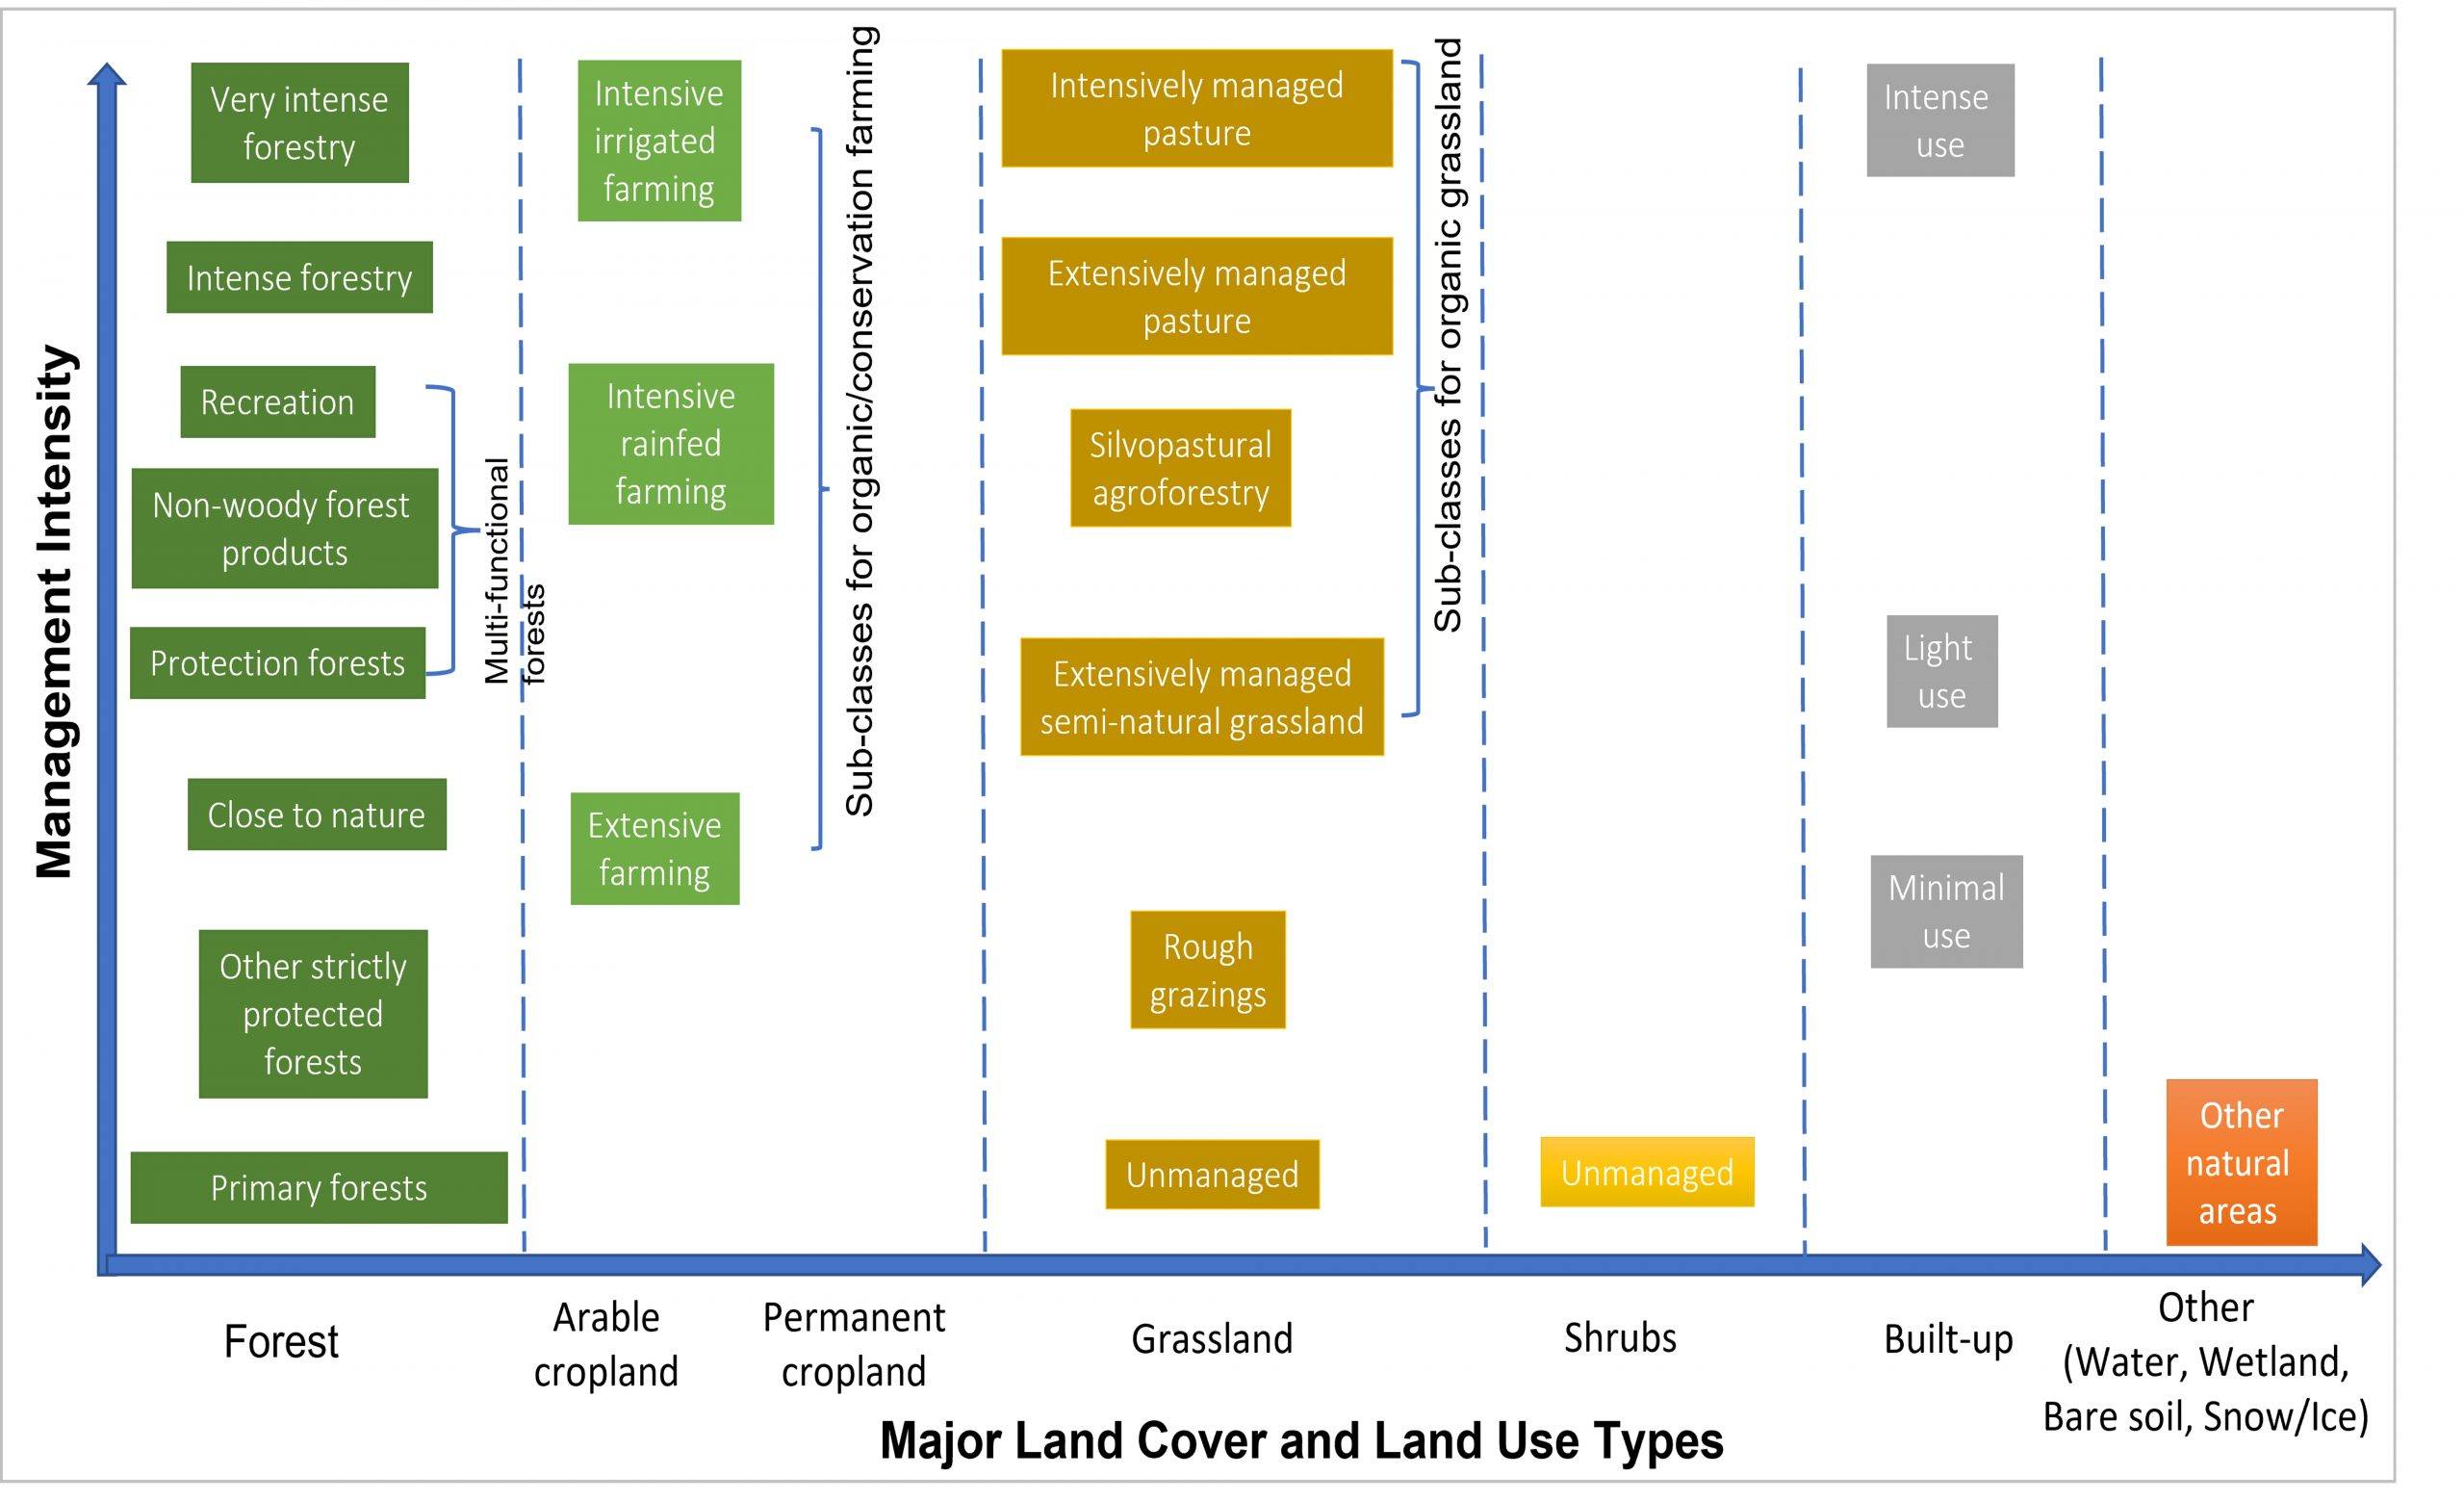 WP2 Land Use Management classes to be mapped in the LAMASUS Geodatabase